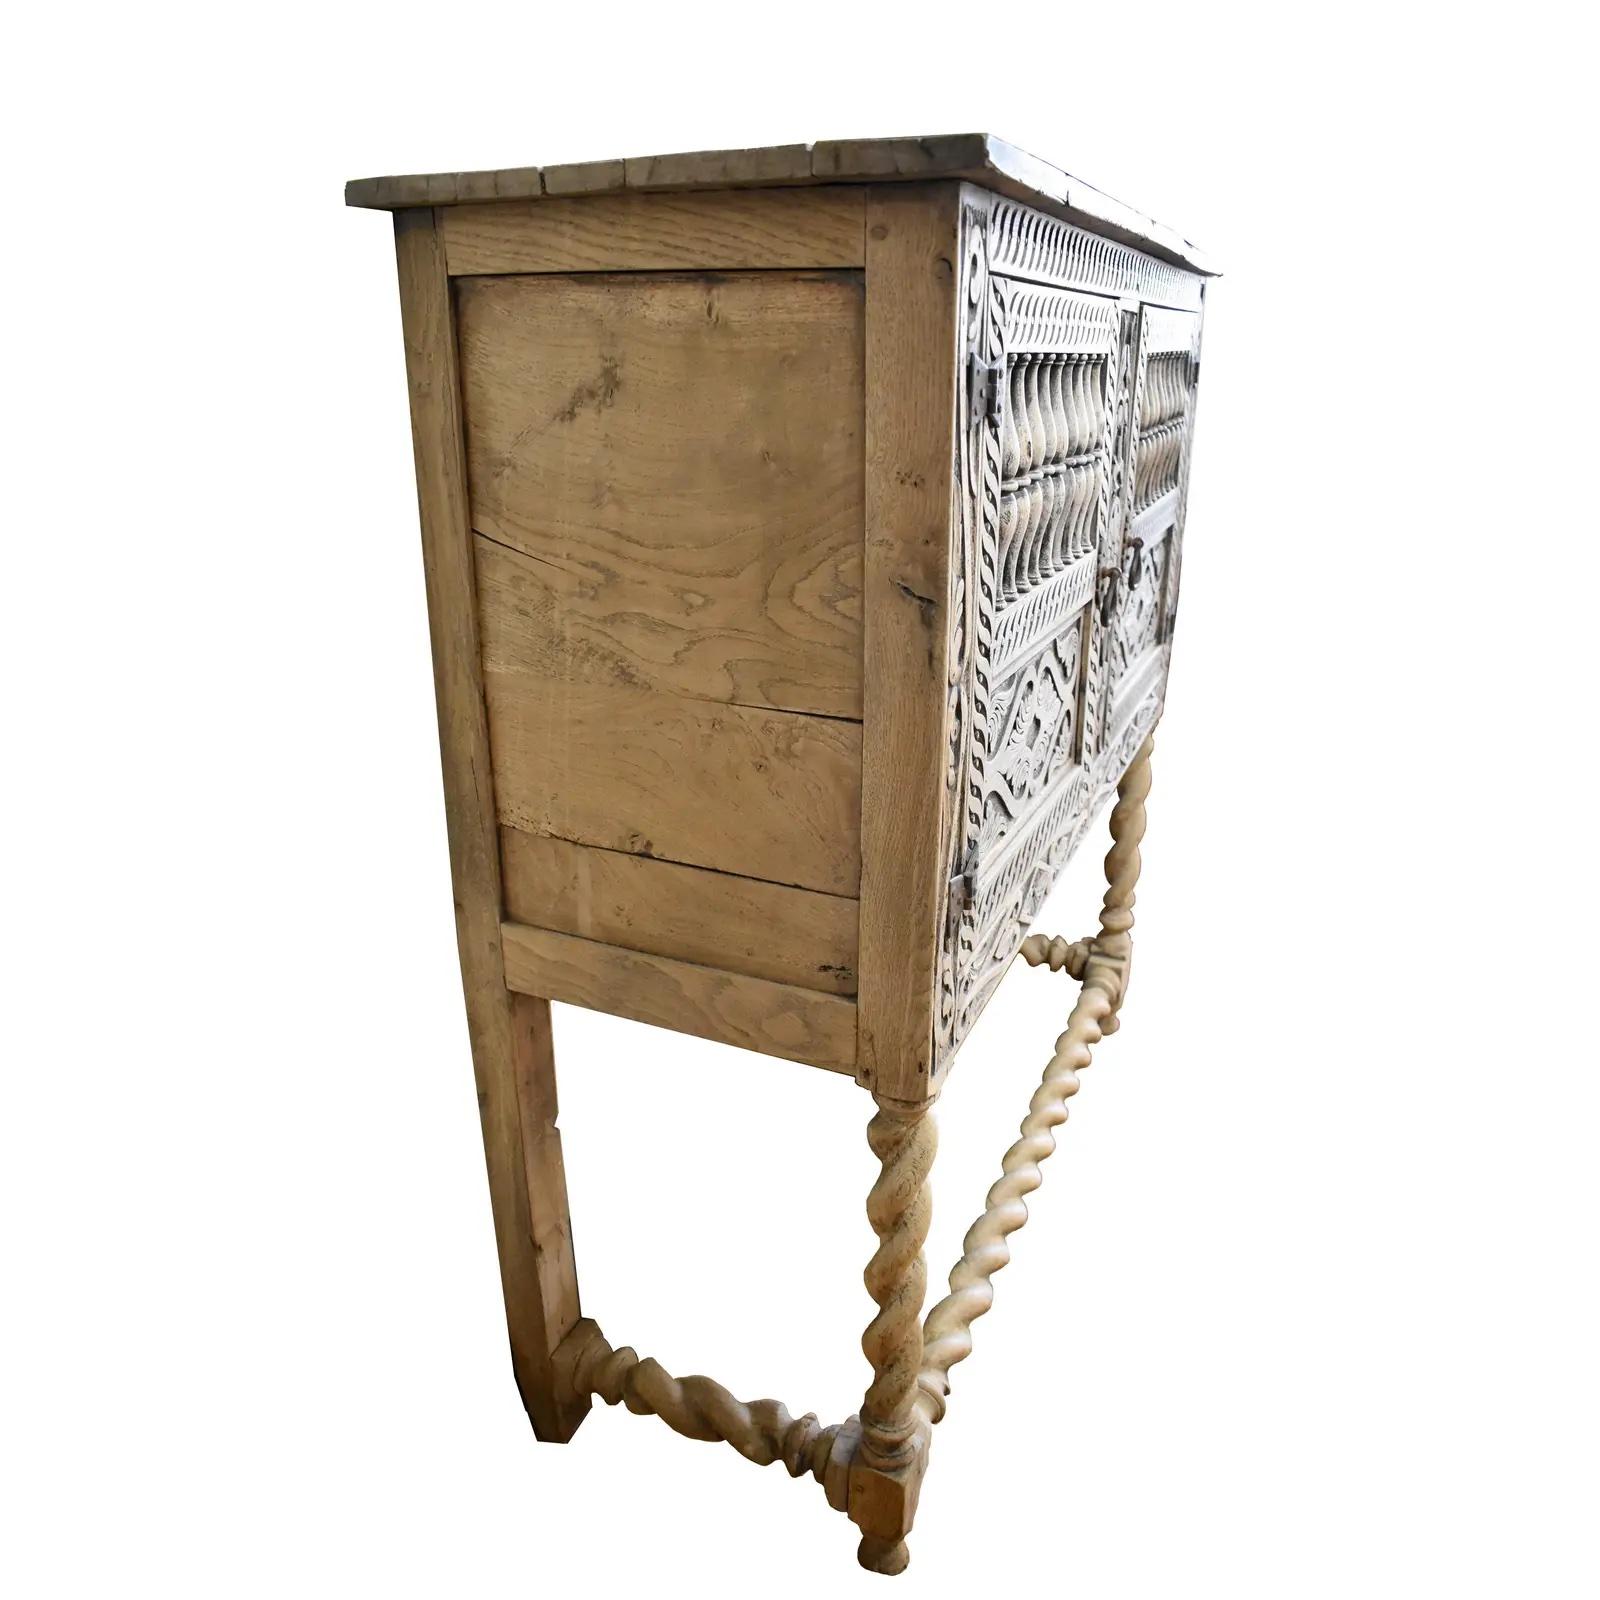 Beautifully carved and proportioned English Panettiere/Livery cabinet from the early 1800s. The piece is made of solid English Oak using pegged construction. It was bleached to delicate creamy white color, making it a piece that can fit well with